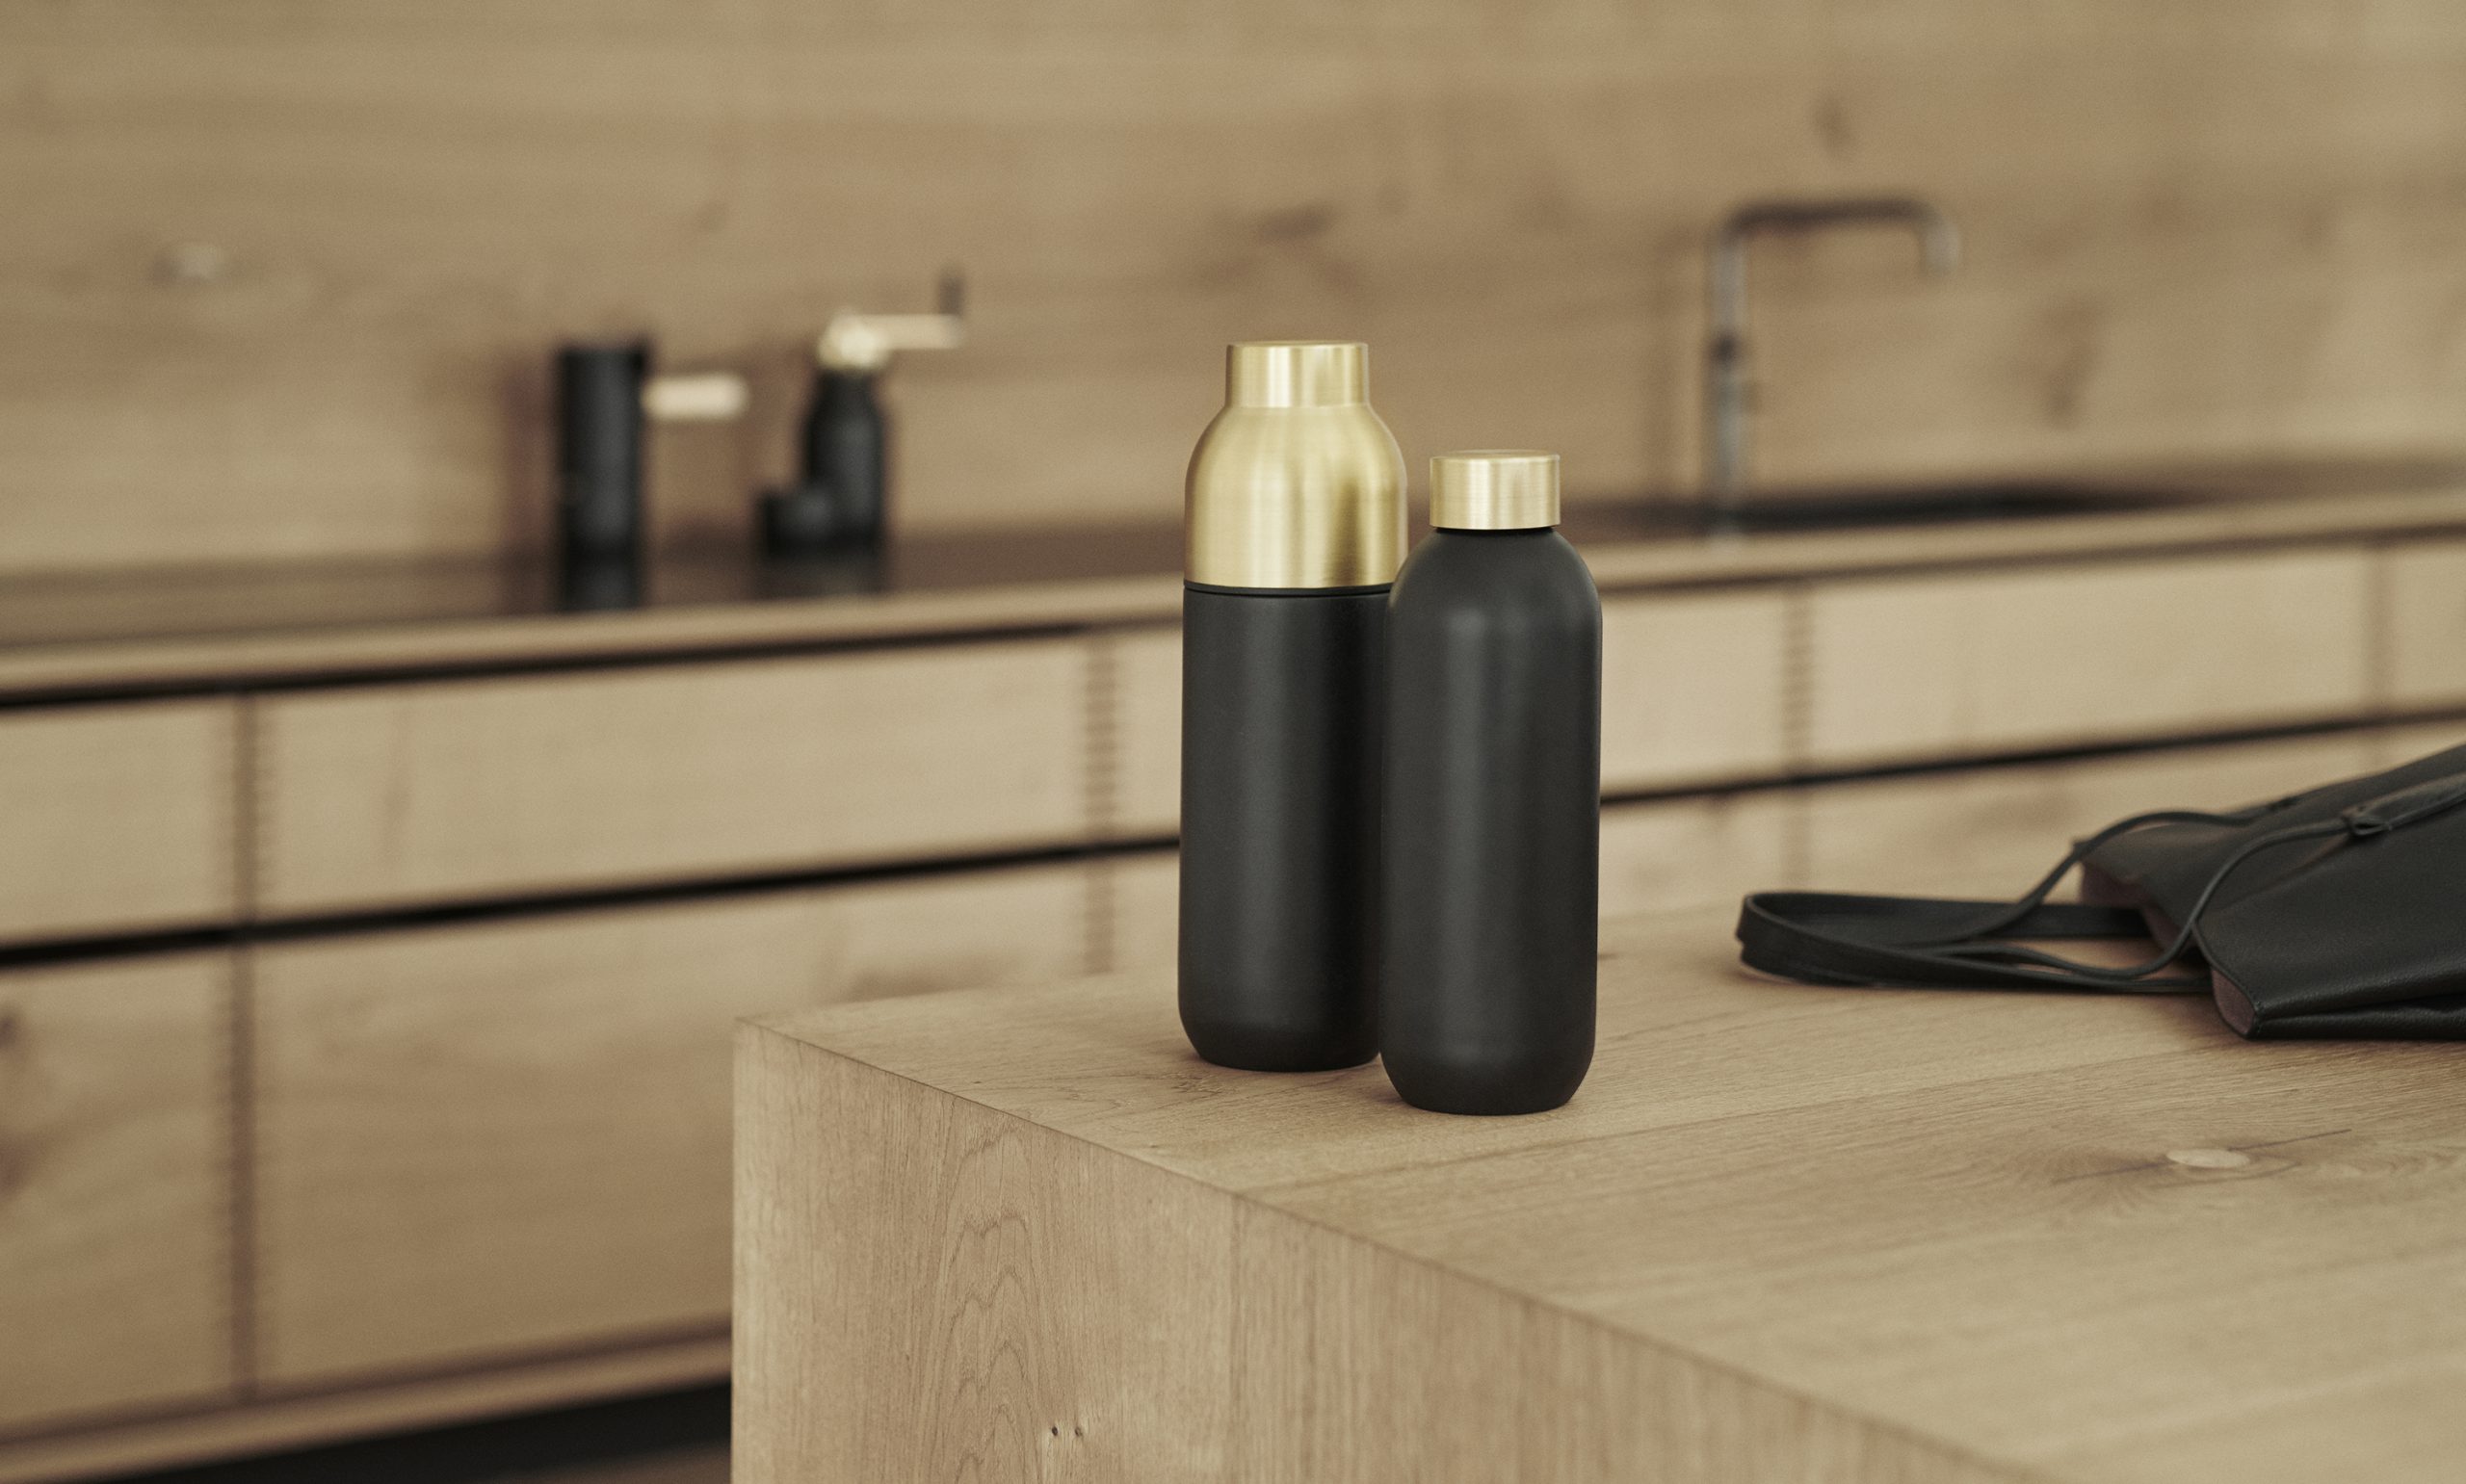 Collar thermo and water bottle by Debiasi Sandri for Stelton